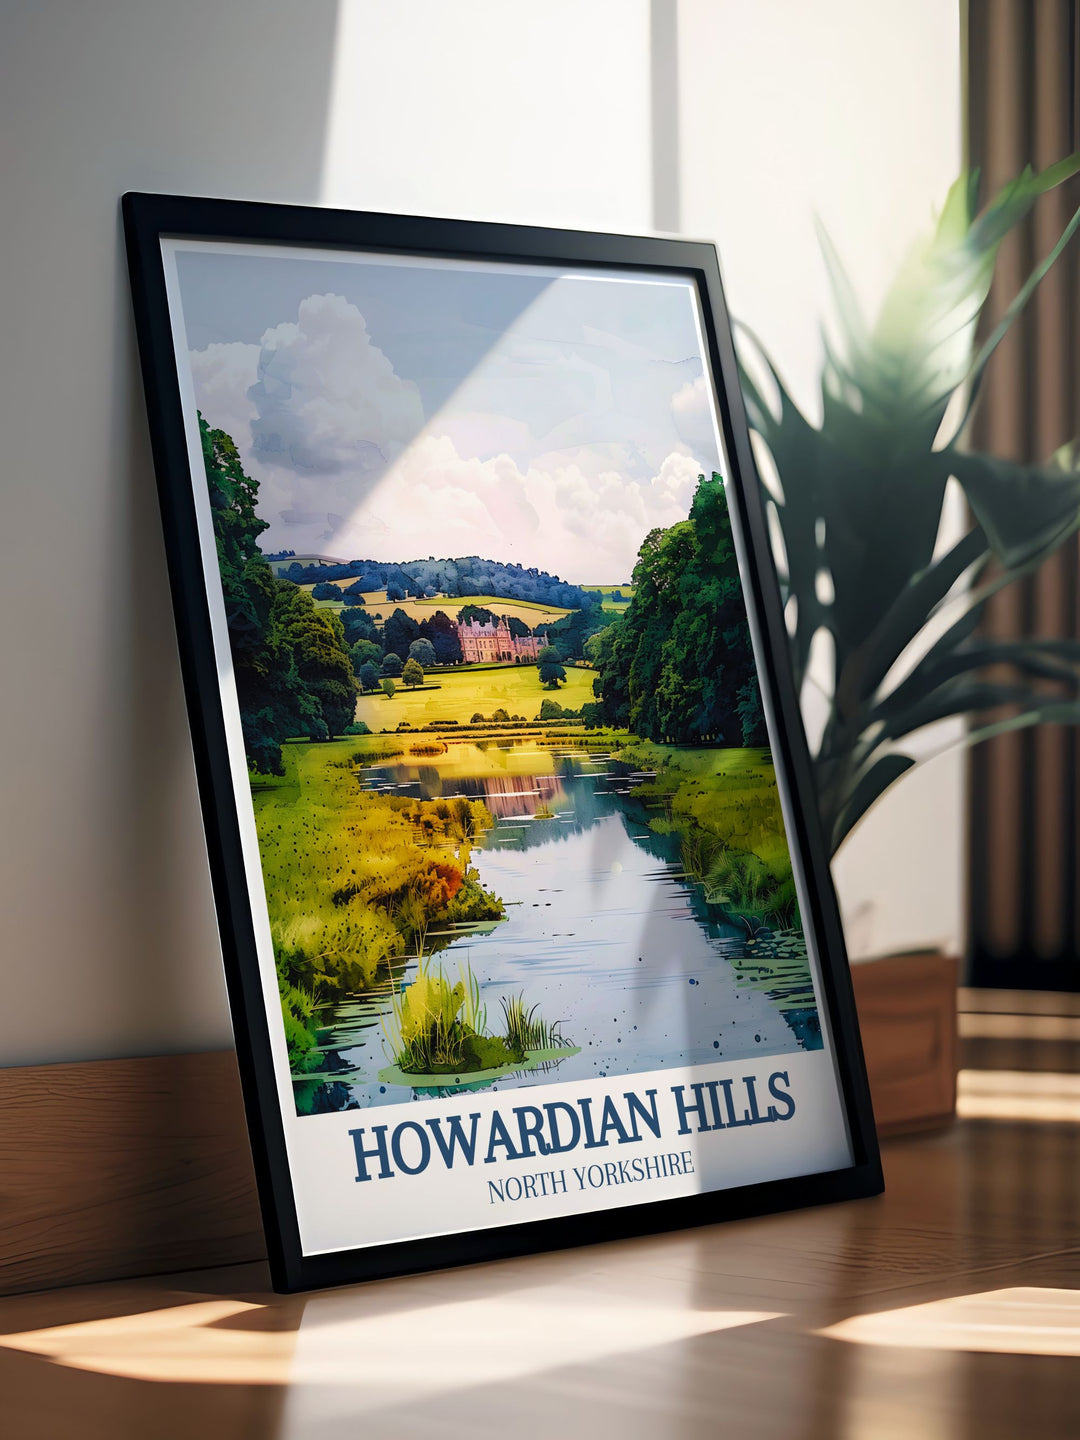 Gallery wall art of Castle Howard, featuring its opulent interiors and stunning grounds. This print offers a glimpse into Englands rich history and architectural splendor, making it a standout piece for history and art enthusiasts.